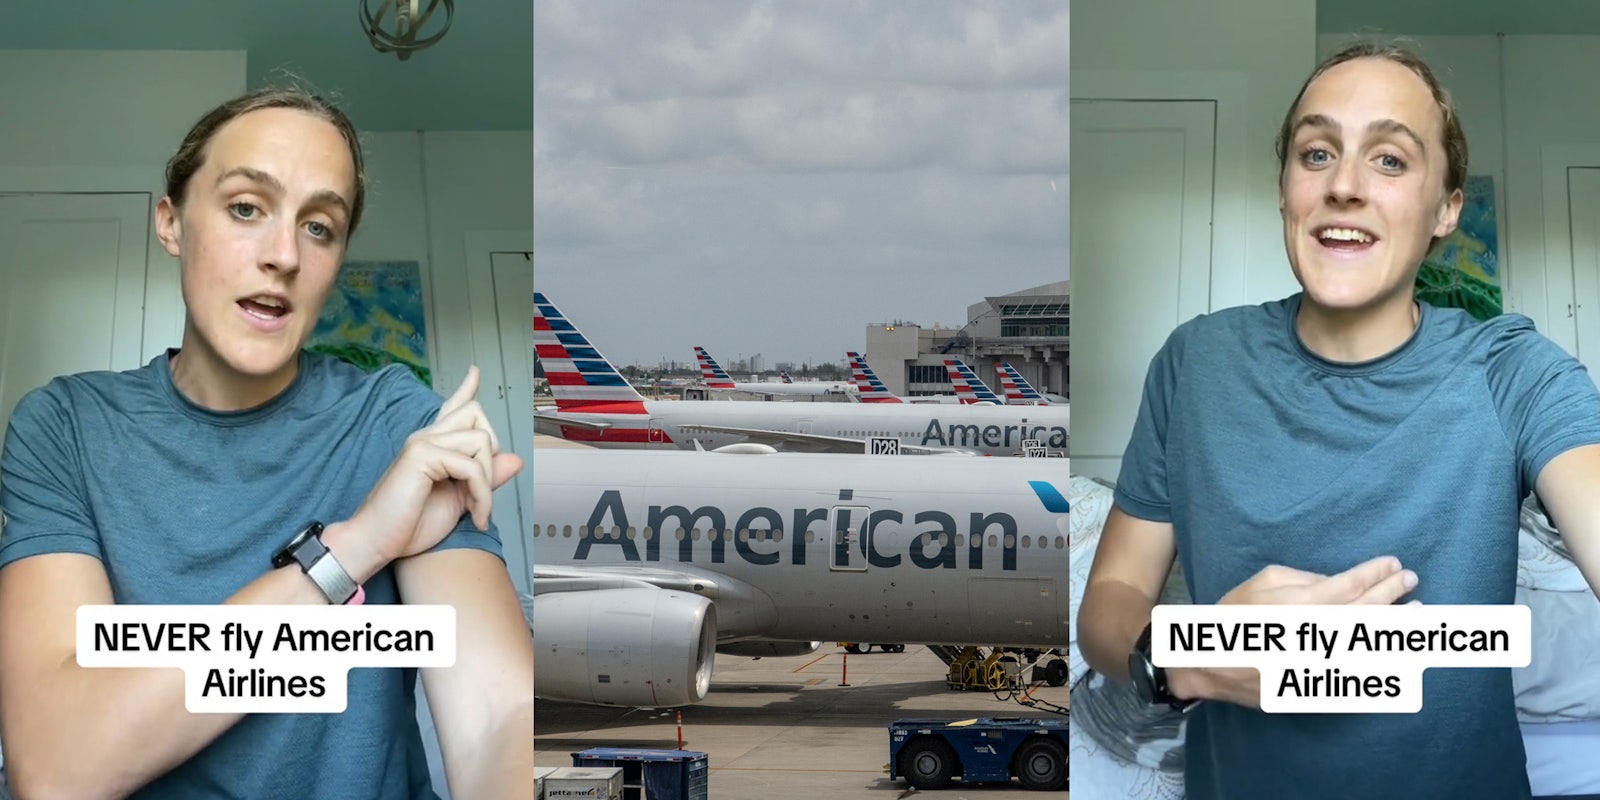 American Airlines customer speaking with caption 'NEVER fly American Airlines' (l) American Airlines planes (c) American Airlines customer speaking with caption 'NEVER fly American Airlines' (r)